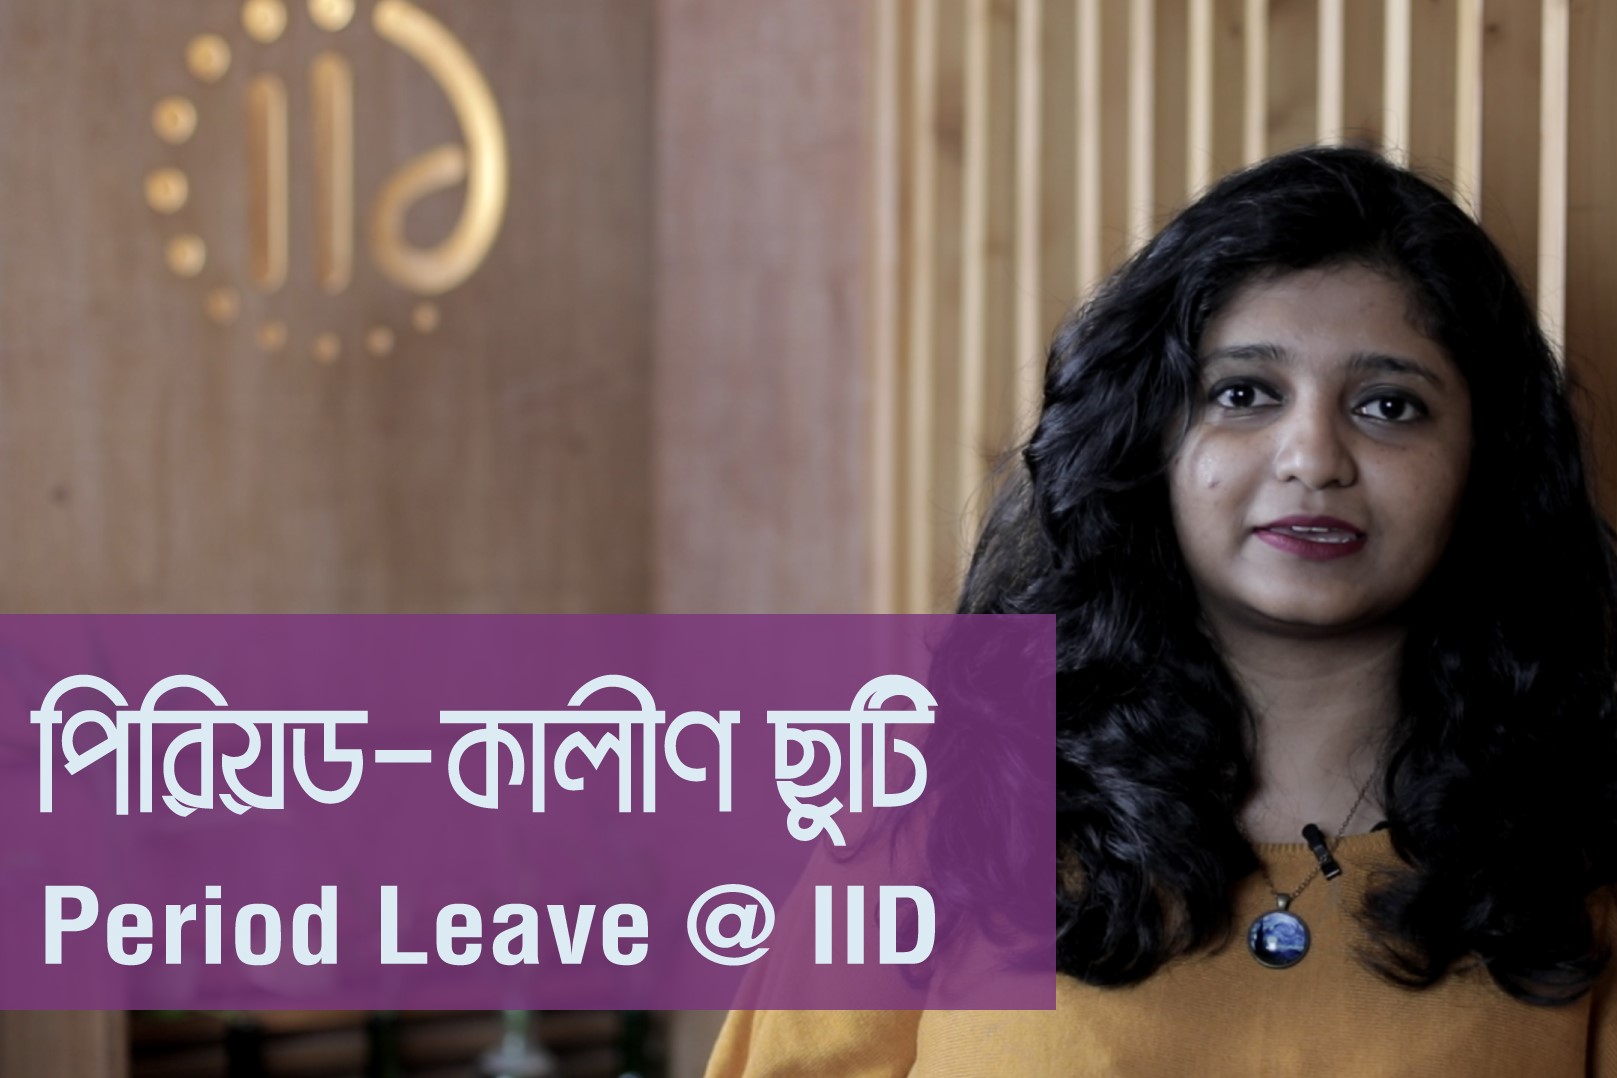 IID celebrates International Woman’s Day by introducing menstruation leave